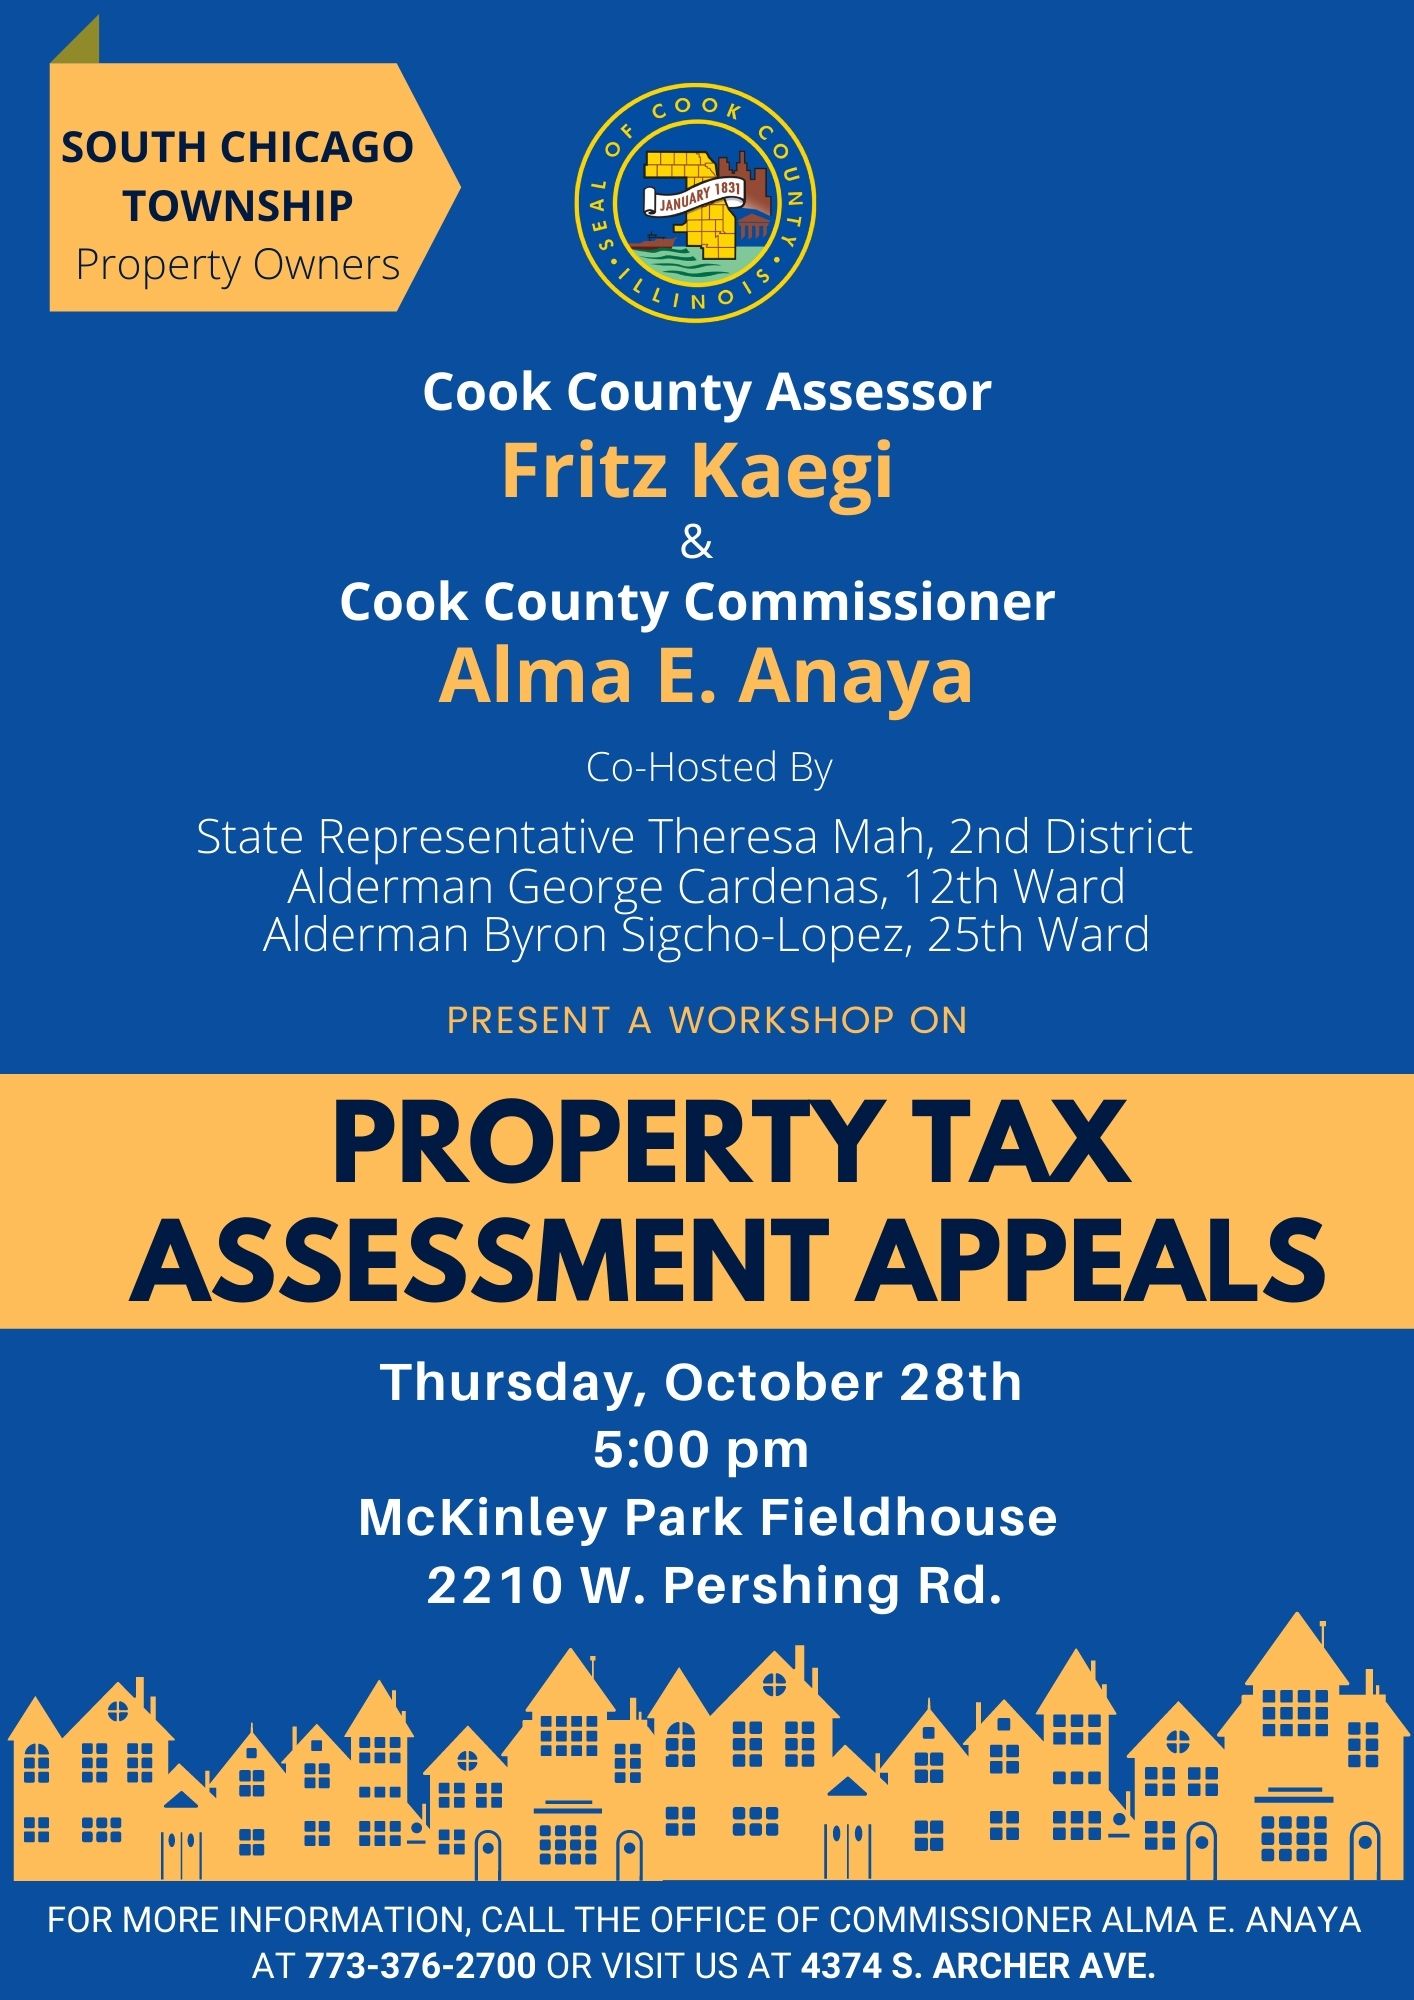 Invite to South Chicago Township Event October 28, 2021